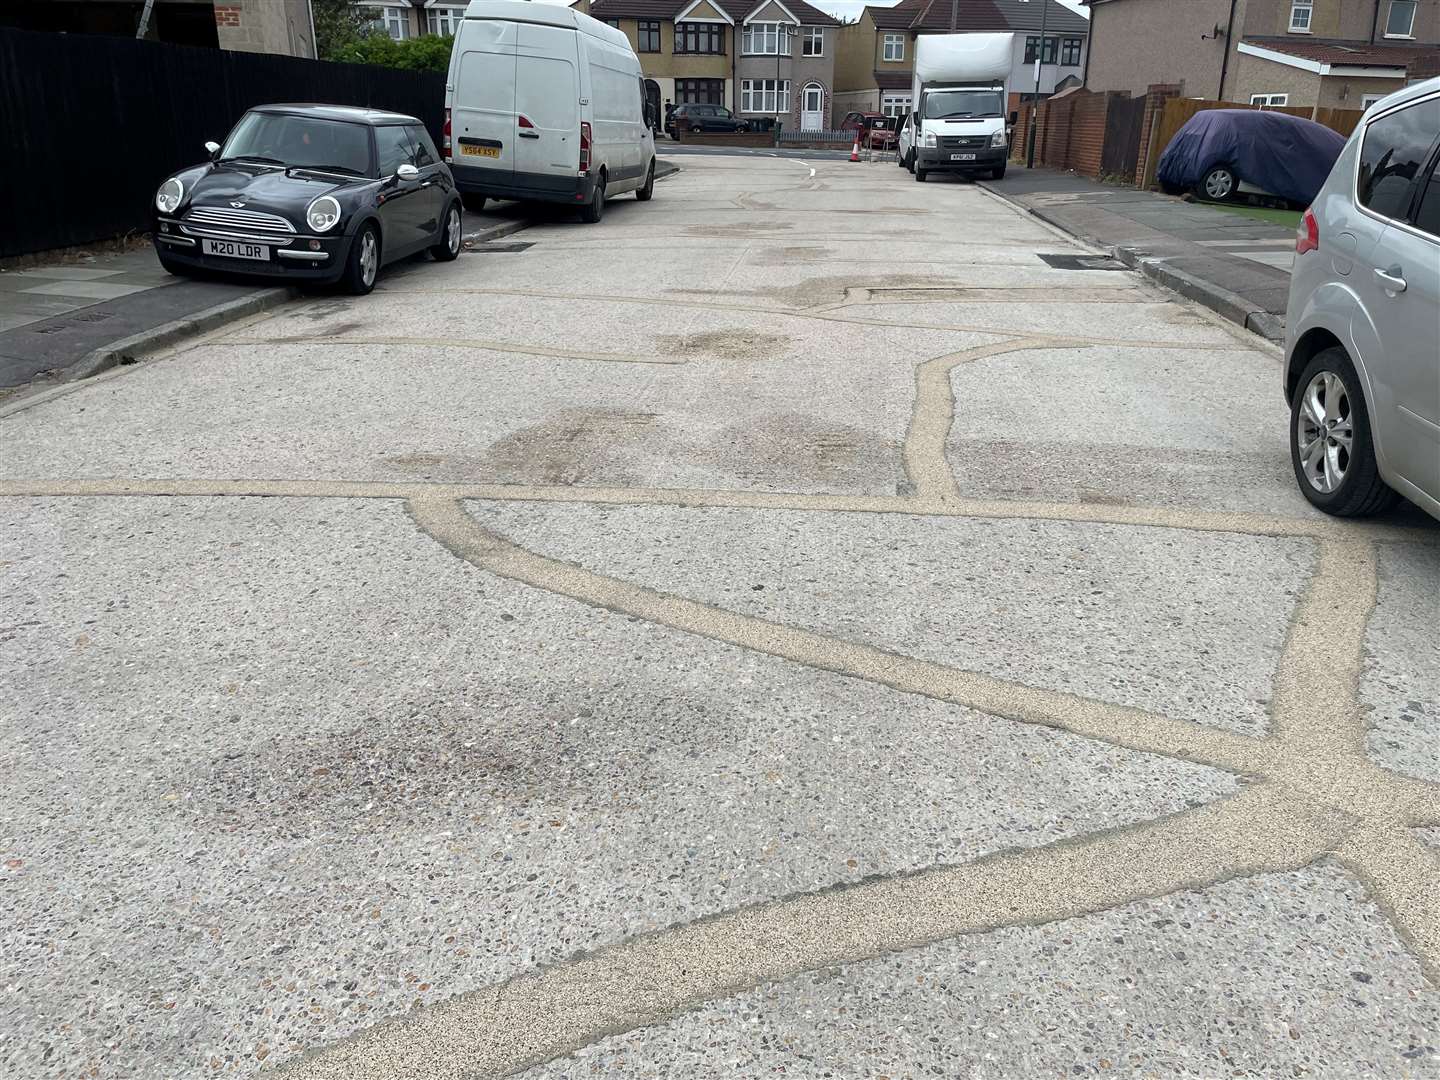 The road has been resurfaced but residents are not happy with the result